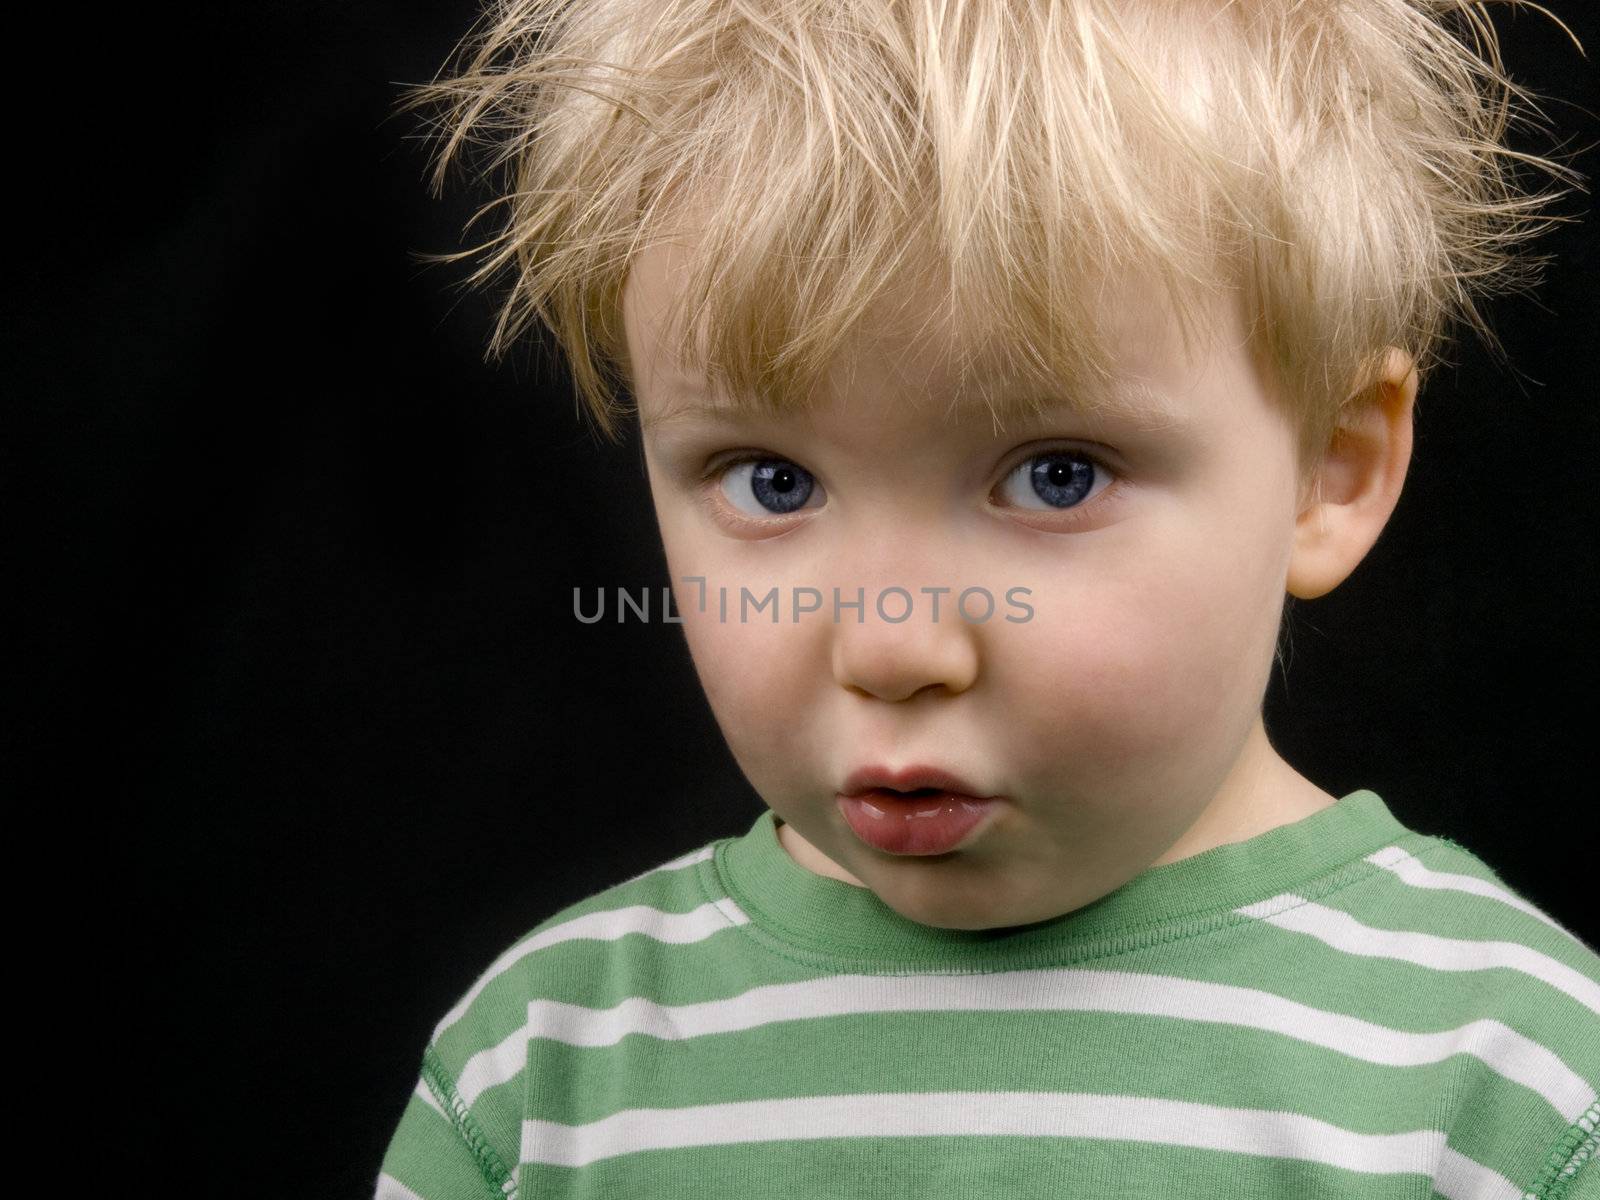 Little boy making funny face, on black background. Boy have blue eyes and blond hair and have a bit of dirt on his face